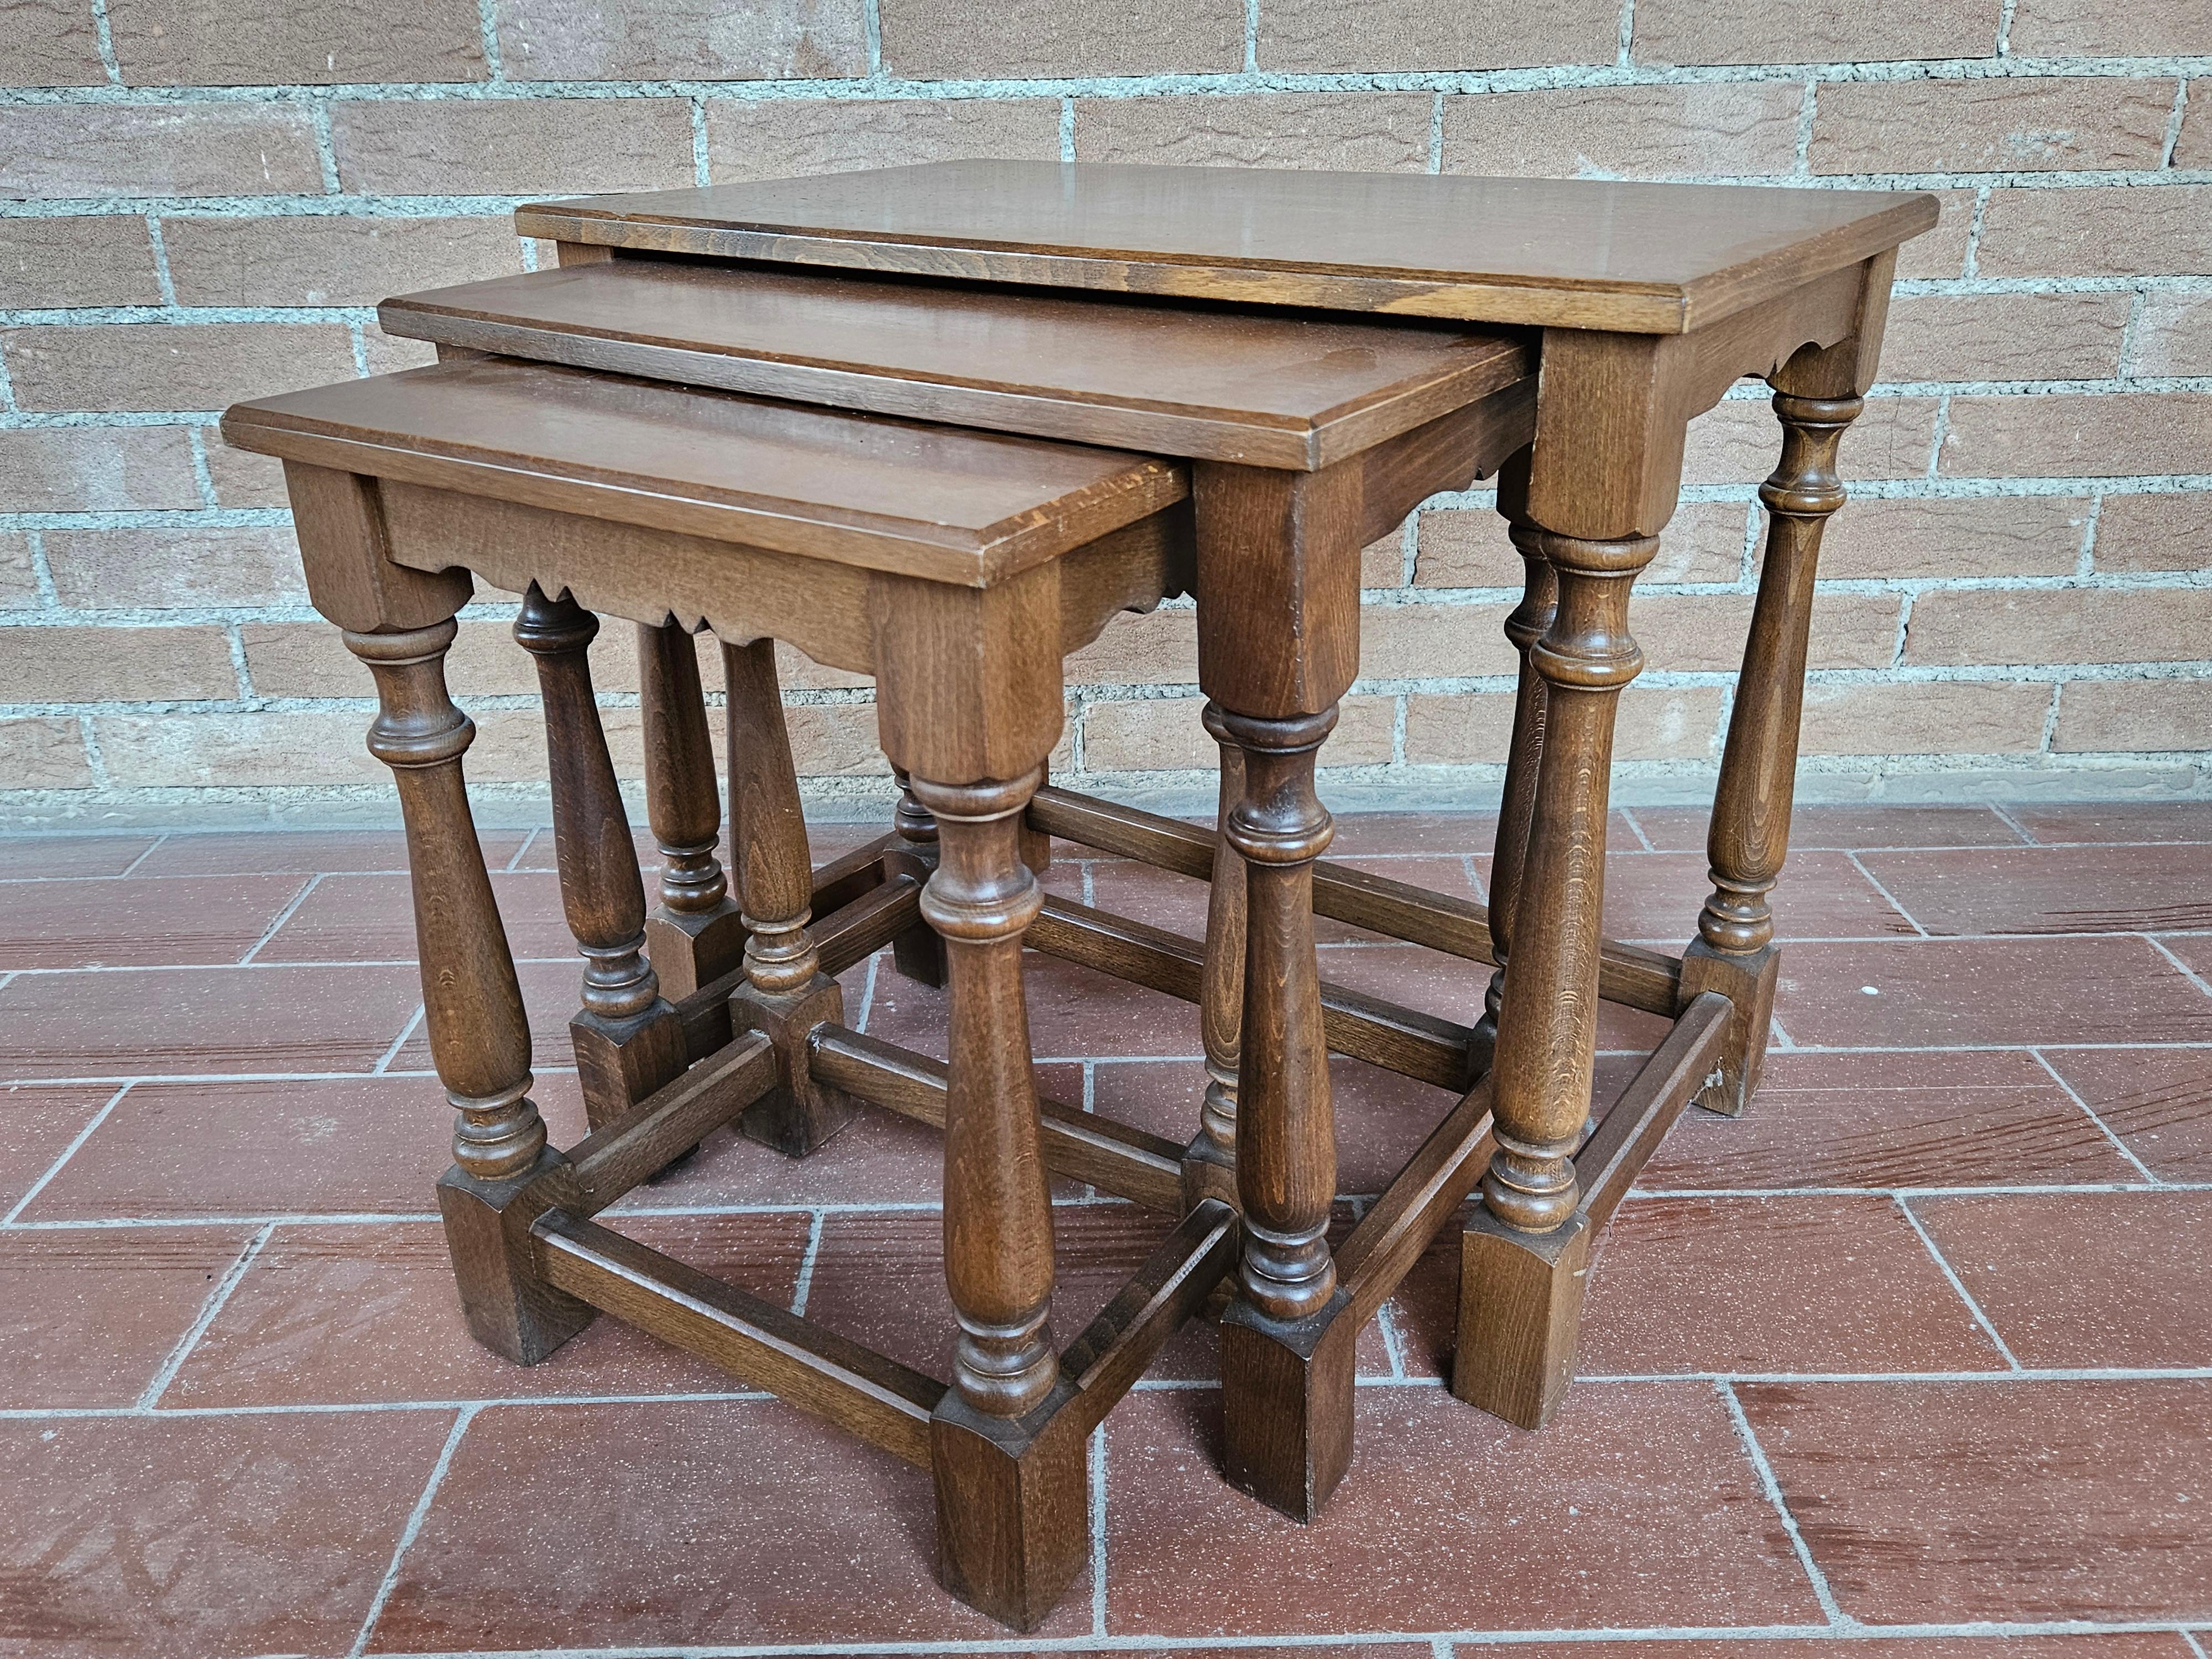 Set of three Italian-made interlocking side tables from the early 1980s.

Large coffee table measurements: W 59cm, D 36.5cm, H 50cm
Medium coffee table measurements: W 47.5cm, D 31.5cm, H 47cm
Small coffee table measurements: W 35.5cm, D 26cm, H